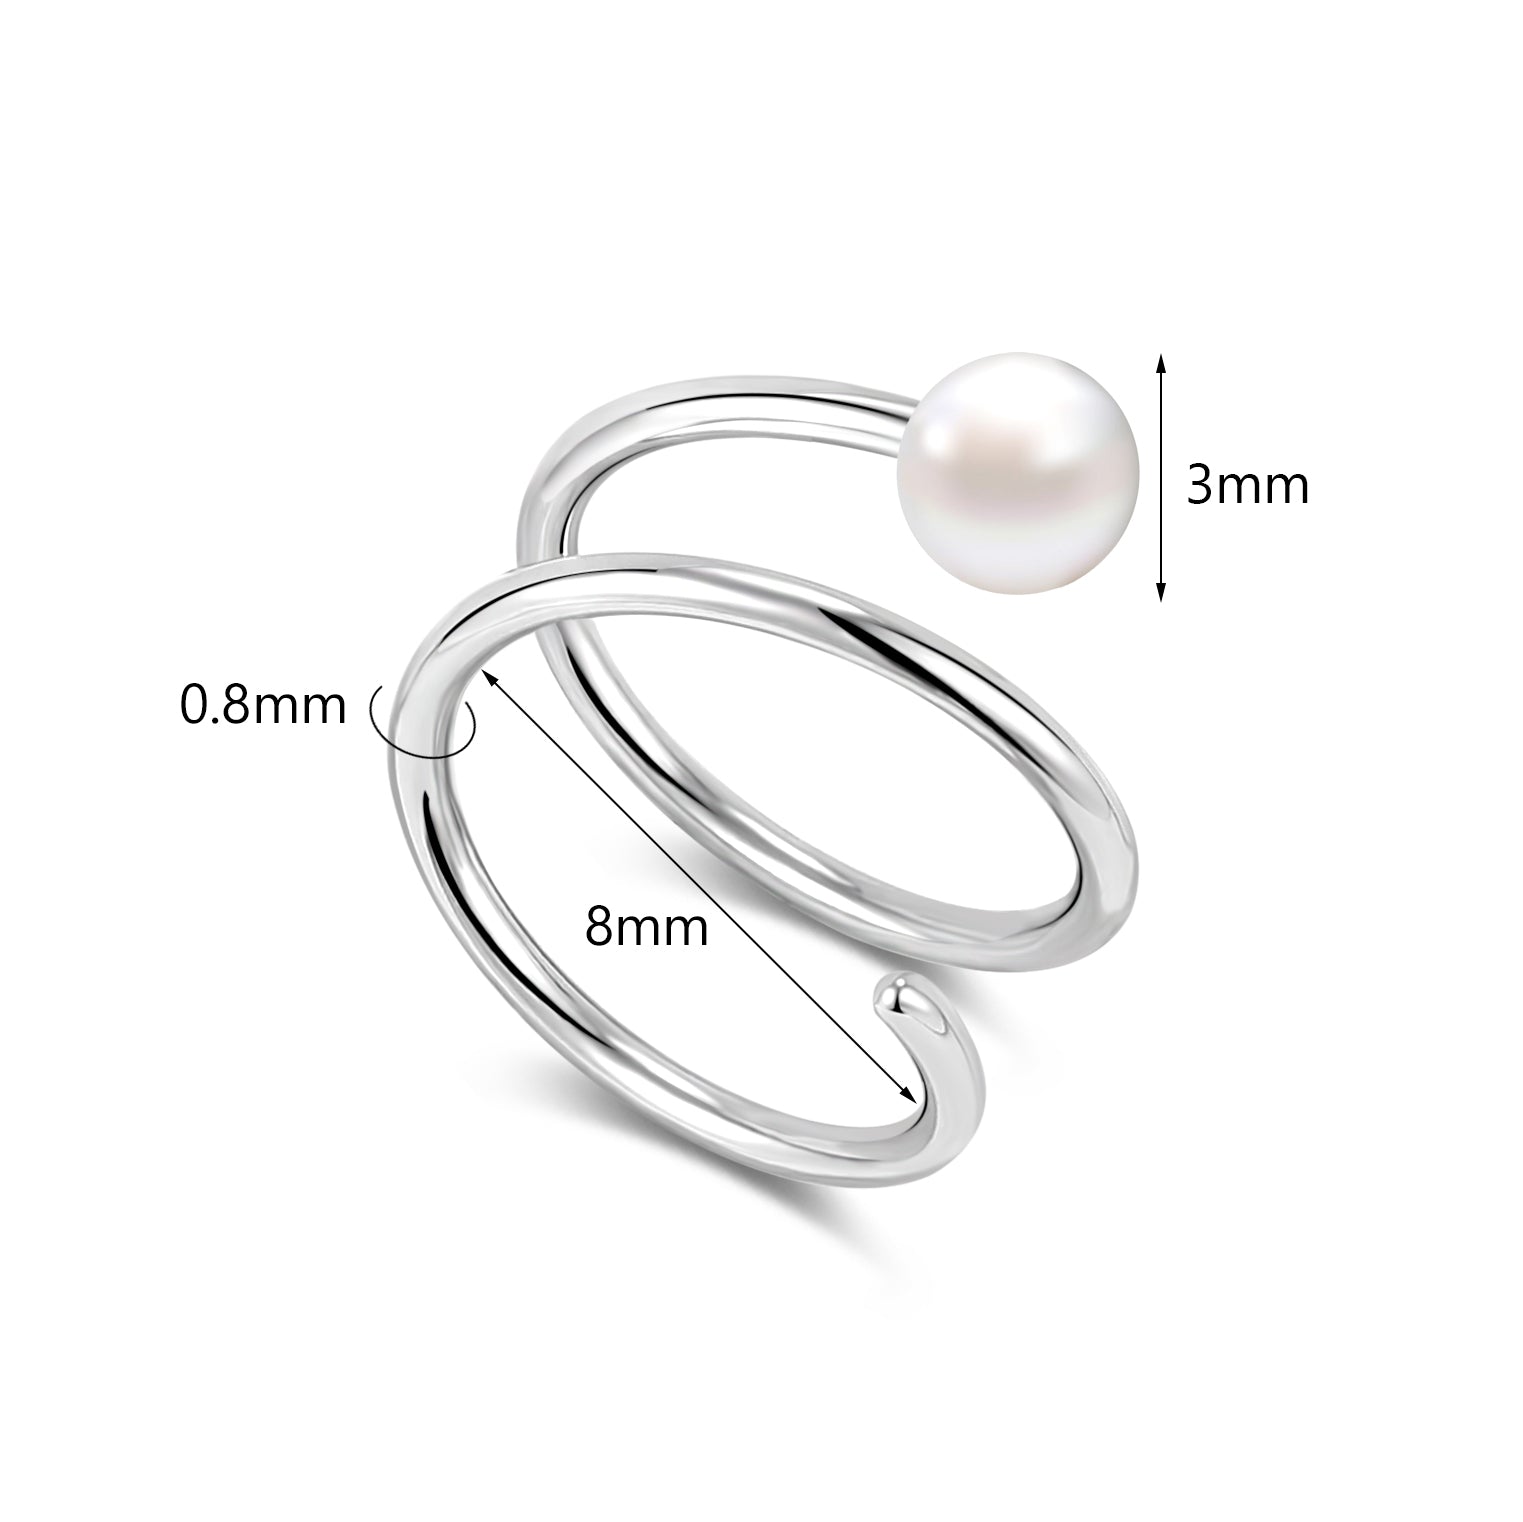 20G-White-Pearl-Nose-Rings-Double-Layered-Spiral-Nose-Piercing-Stainless-Steel-Nostril-Rings